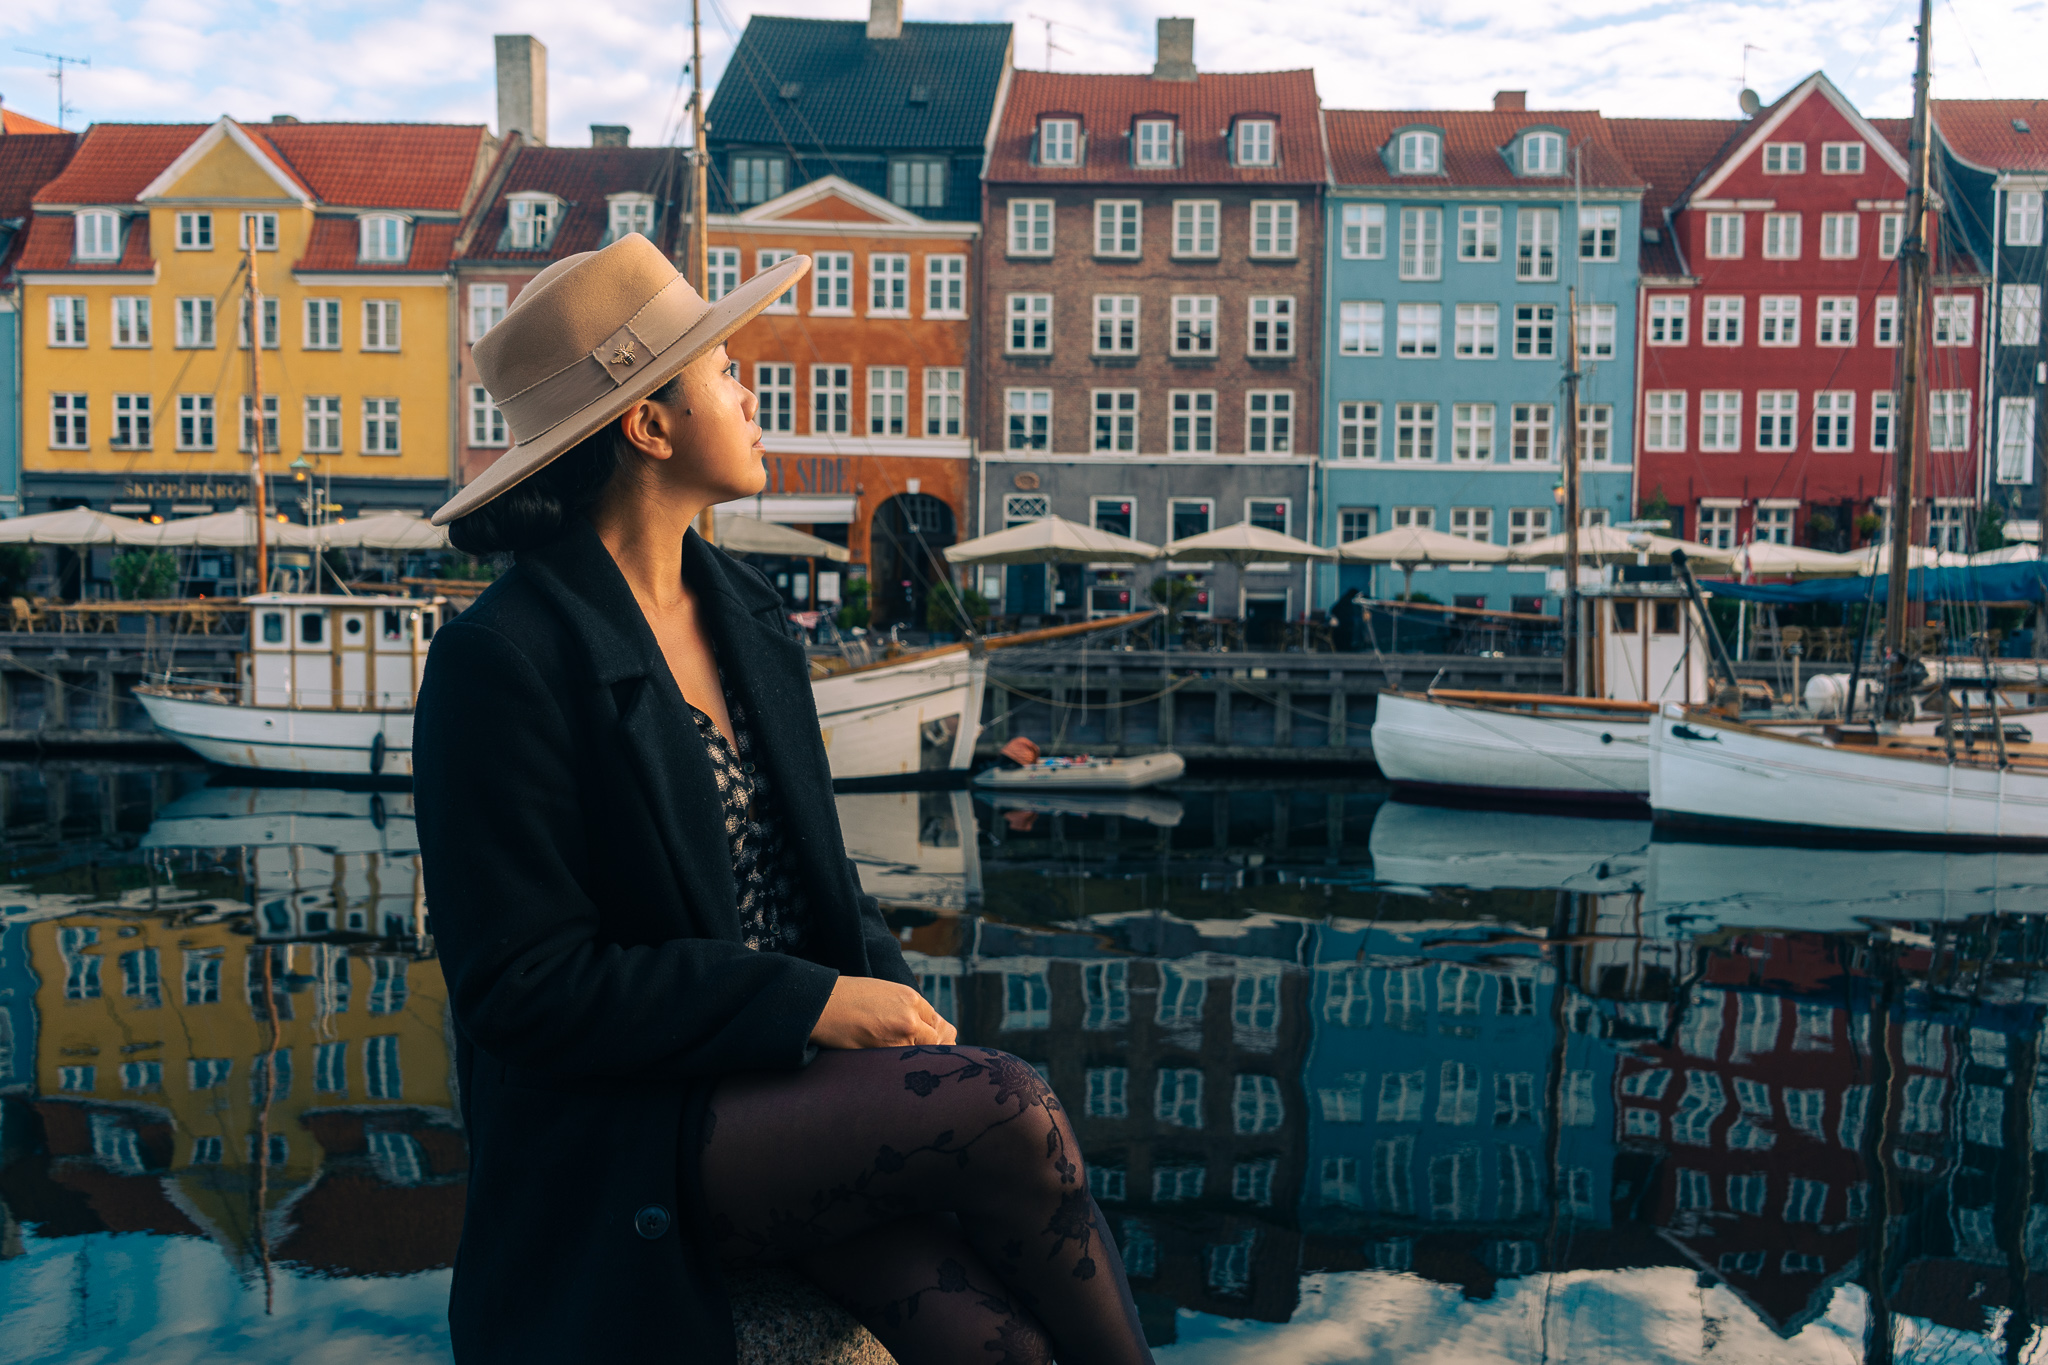 A woman sitting next to the canal in Nyhavn, Copenhagn, in front of the historic colorful fishermen houses